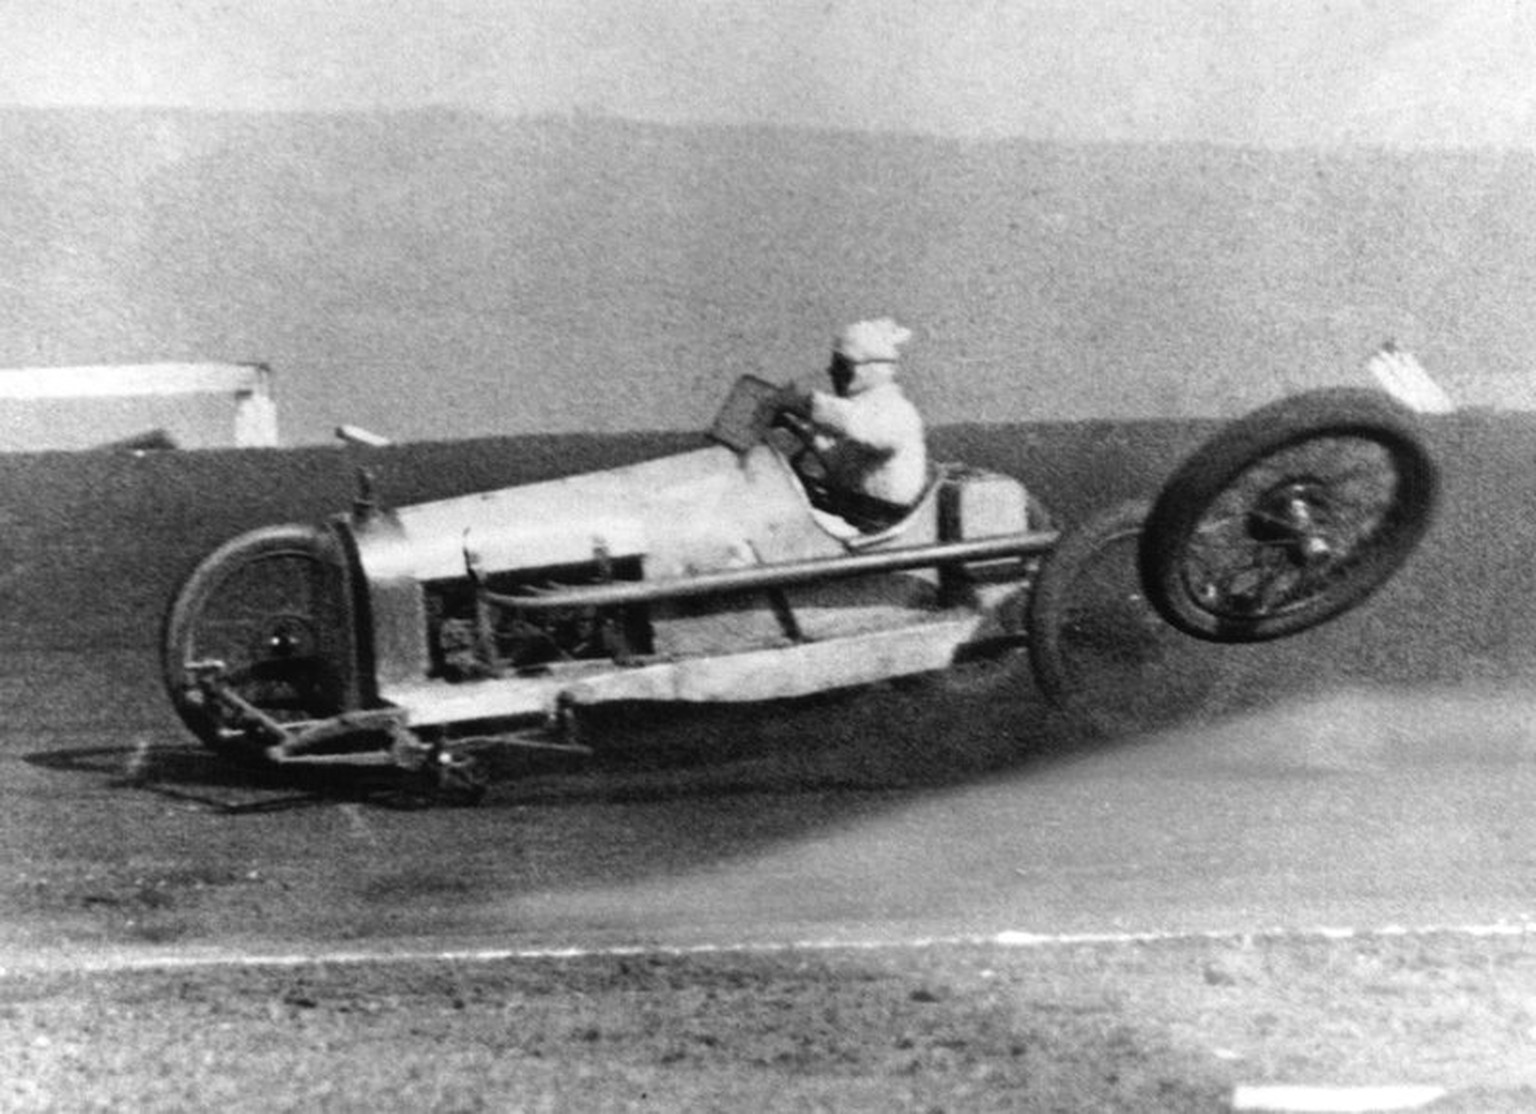 November 1924: A car loses a wheel at high speed on the Culver City Speedway auto motor history https://www.npr.org/sections/13.7/2014/01/08/260752365/a-tribute-to-failure